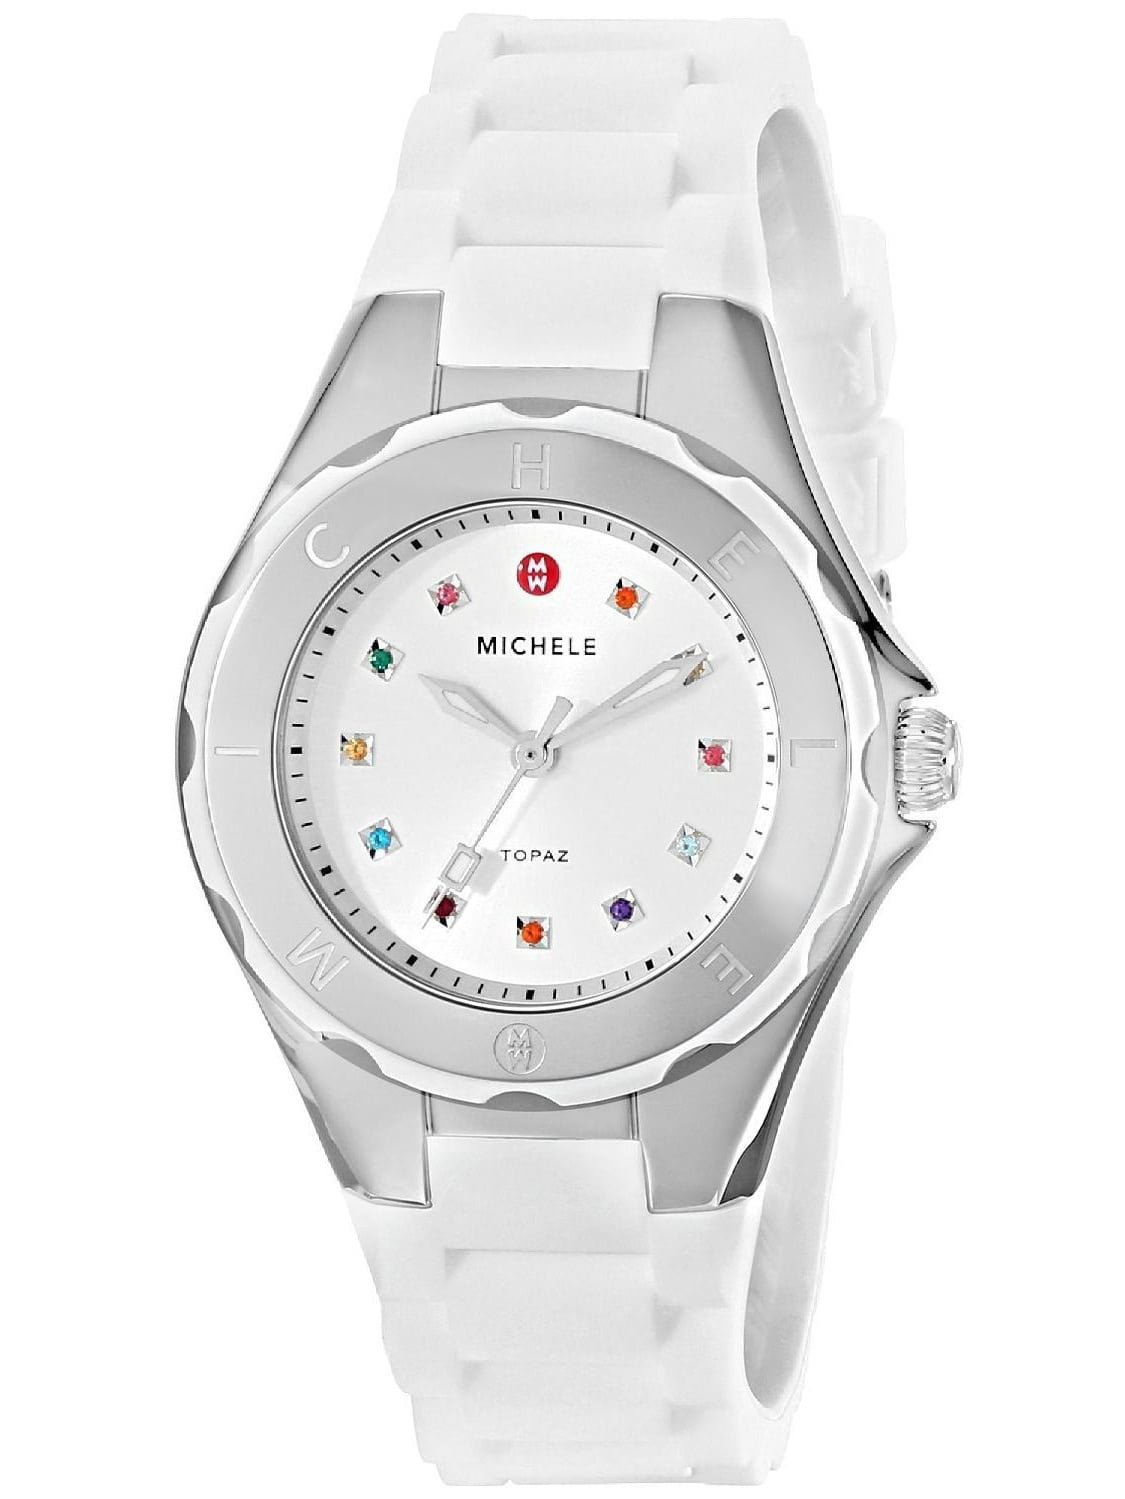 Michele Jelly Bean Watch | lupon.gov.ph